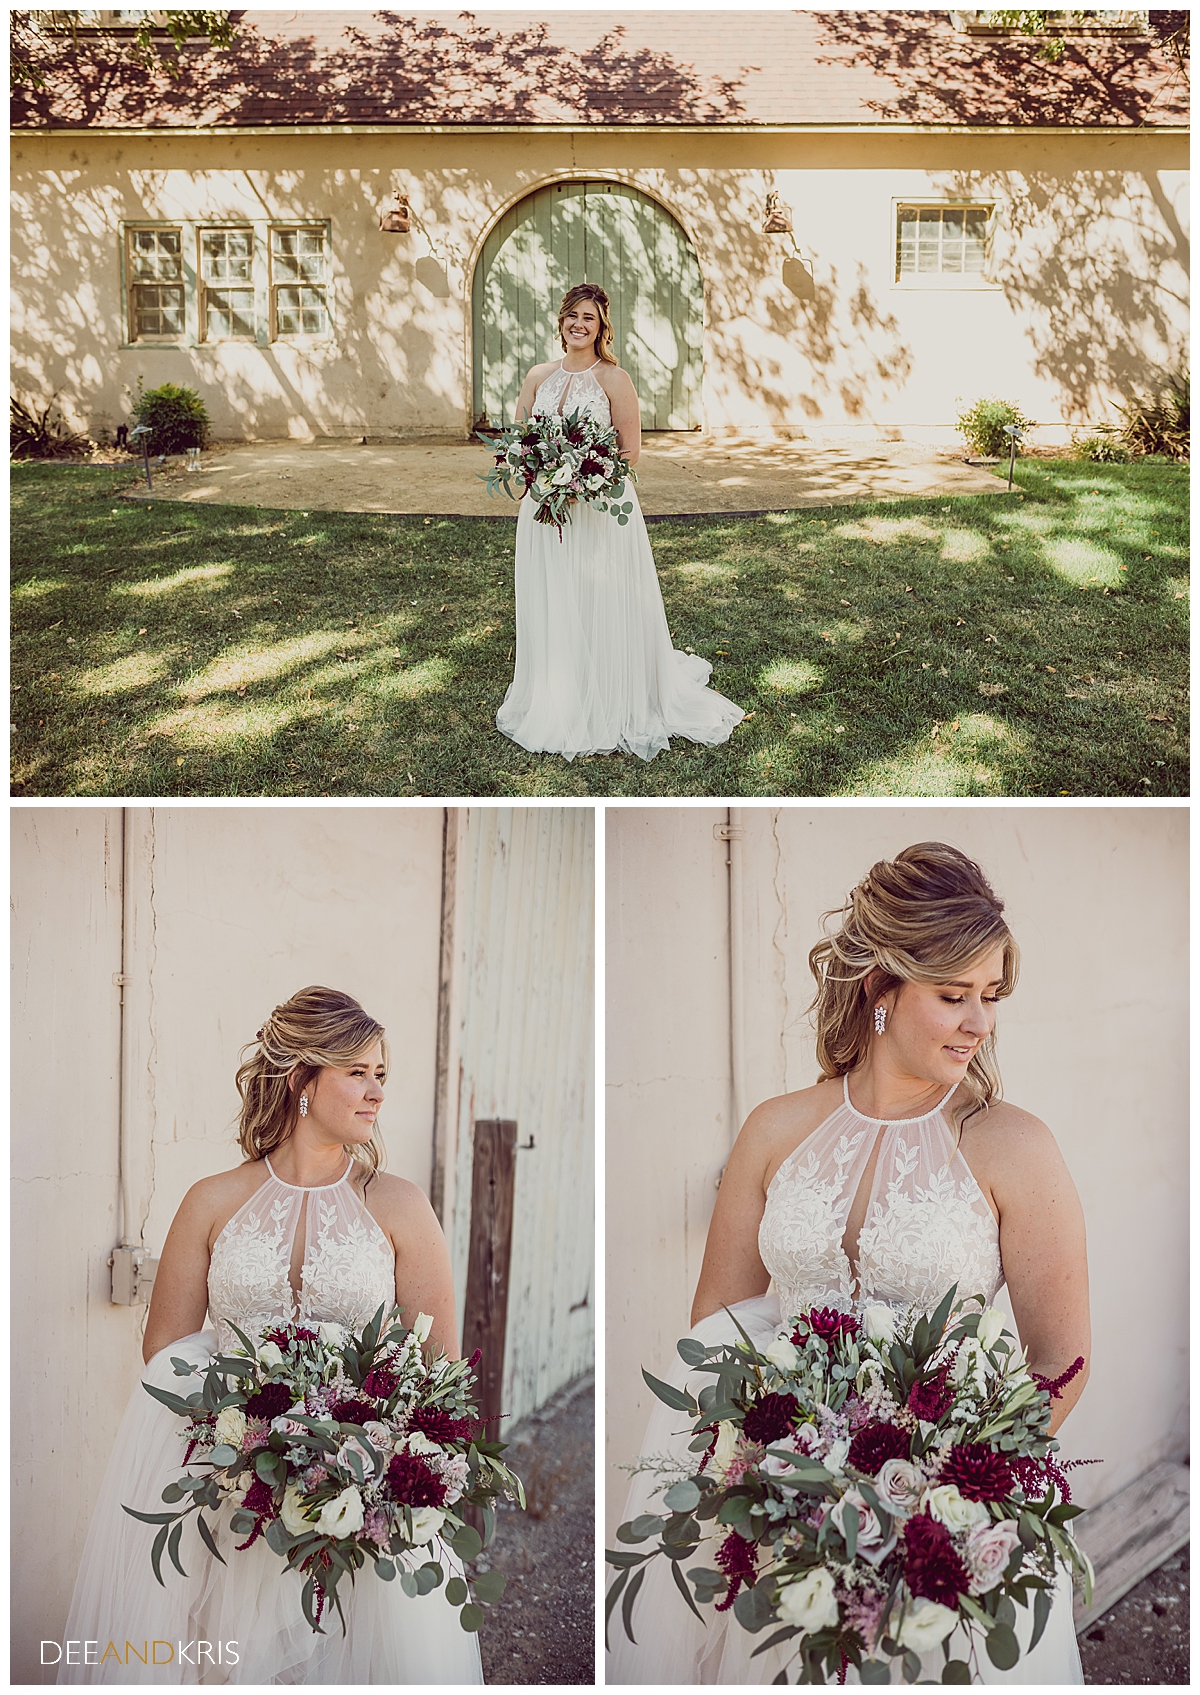 Three images of the bride in various poses in front of green stable doors.